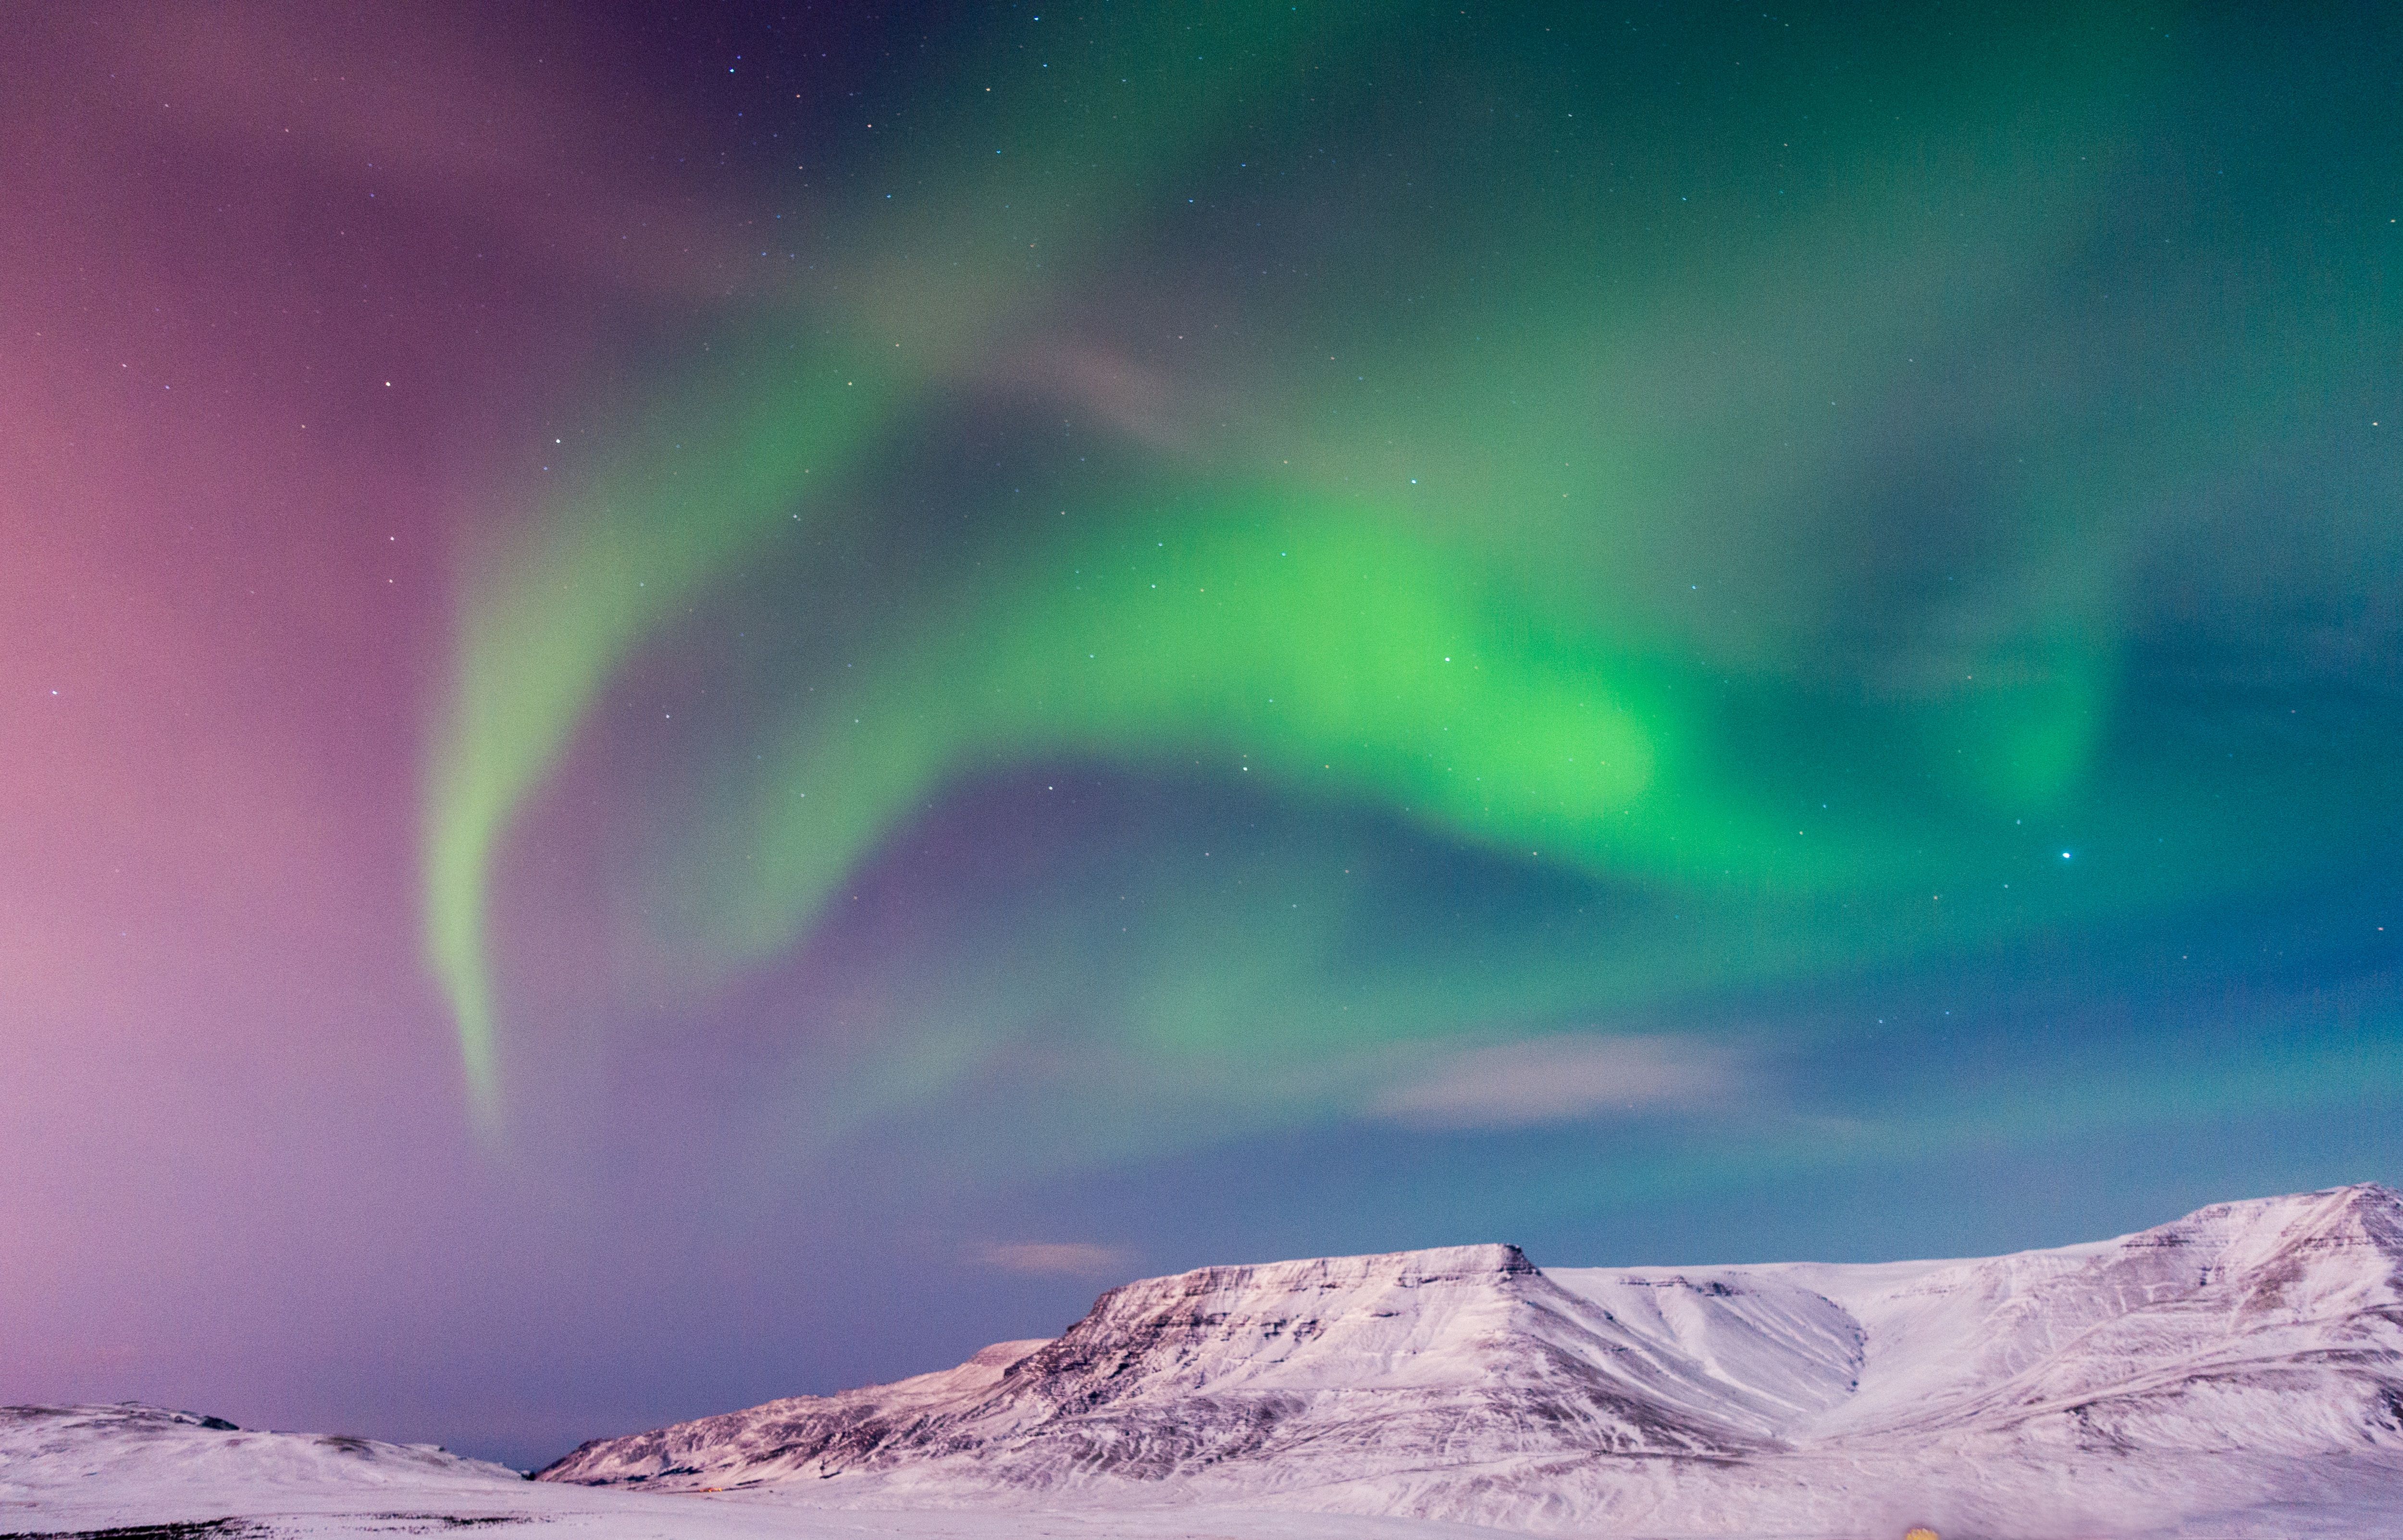 Iceland's northern lights in winter